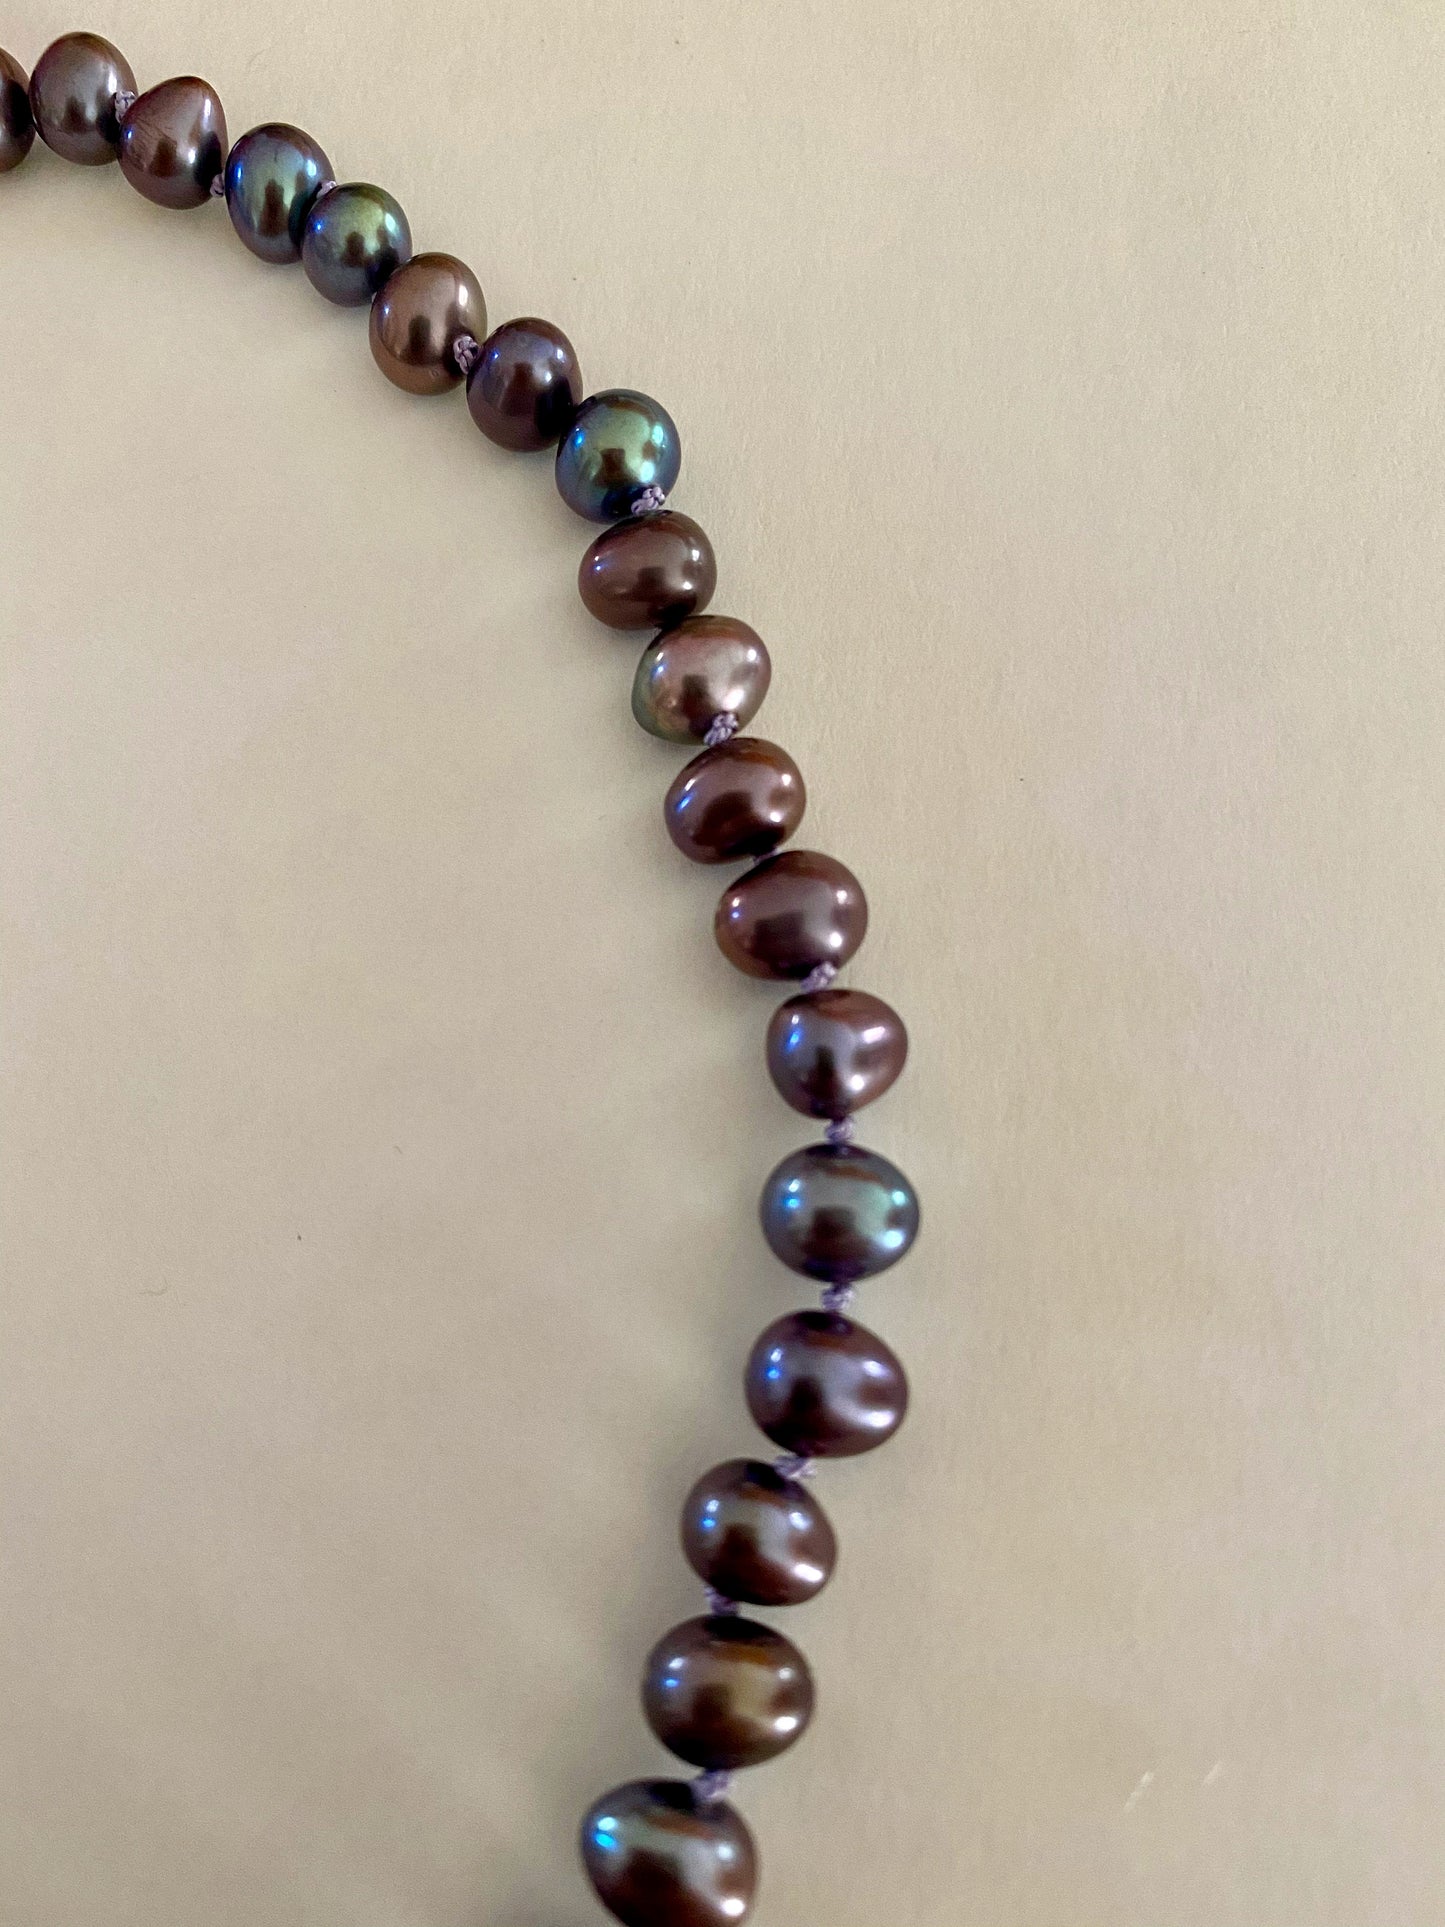 Pearls. Beautiful black/purple Aurora Borealis  knotted fresh water pearl necklace. The necklace is finished with a quality silver magnetic clasp.